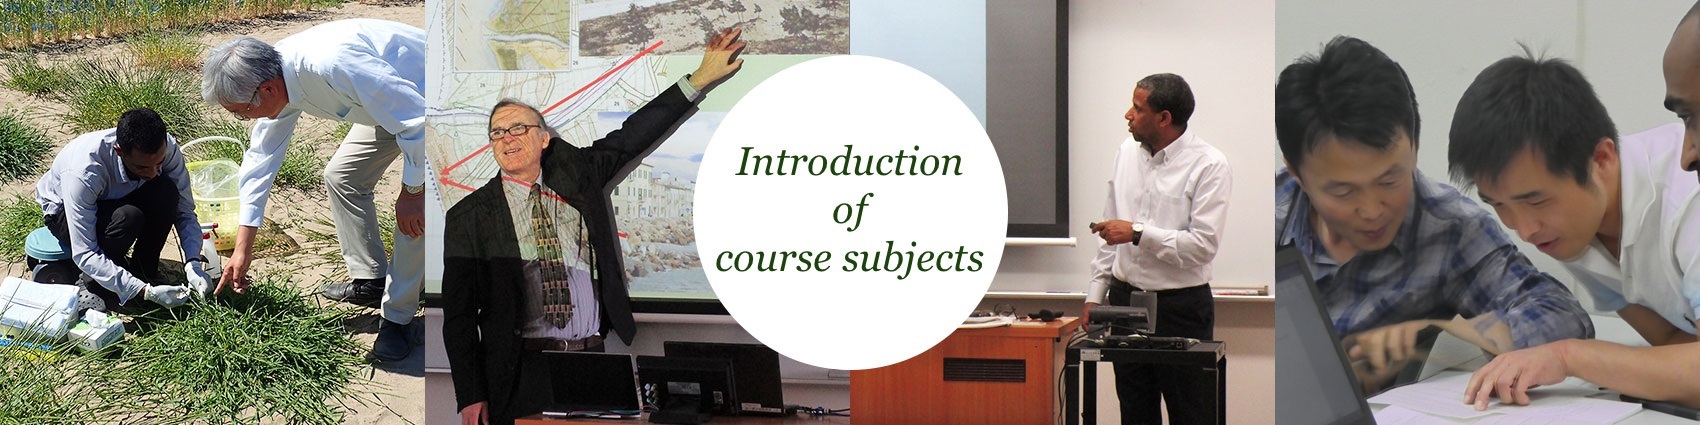 Introduction of course subjects